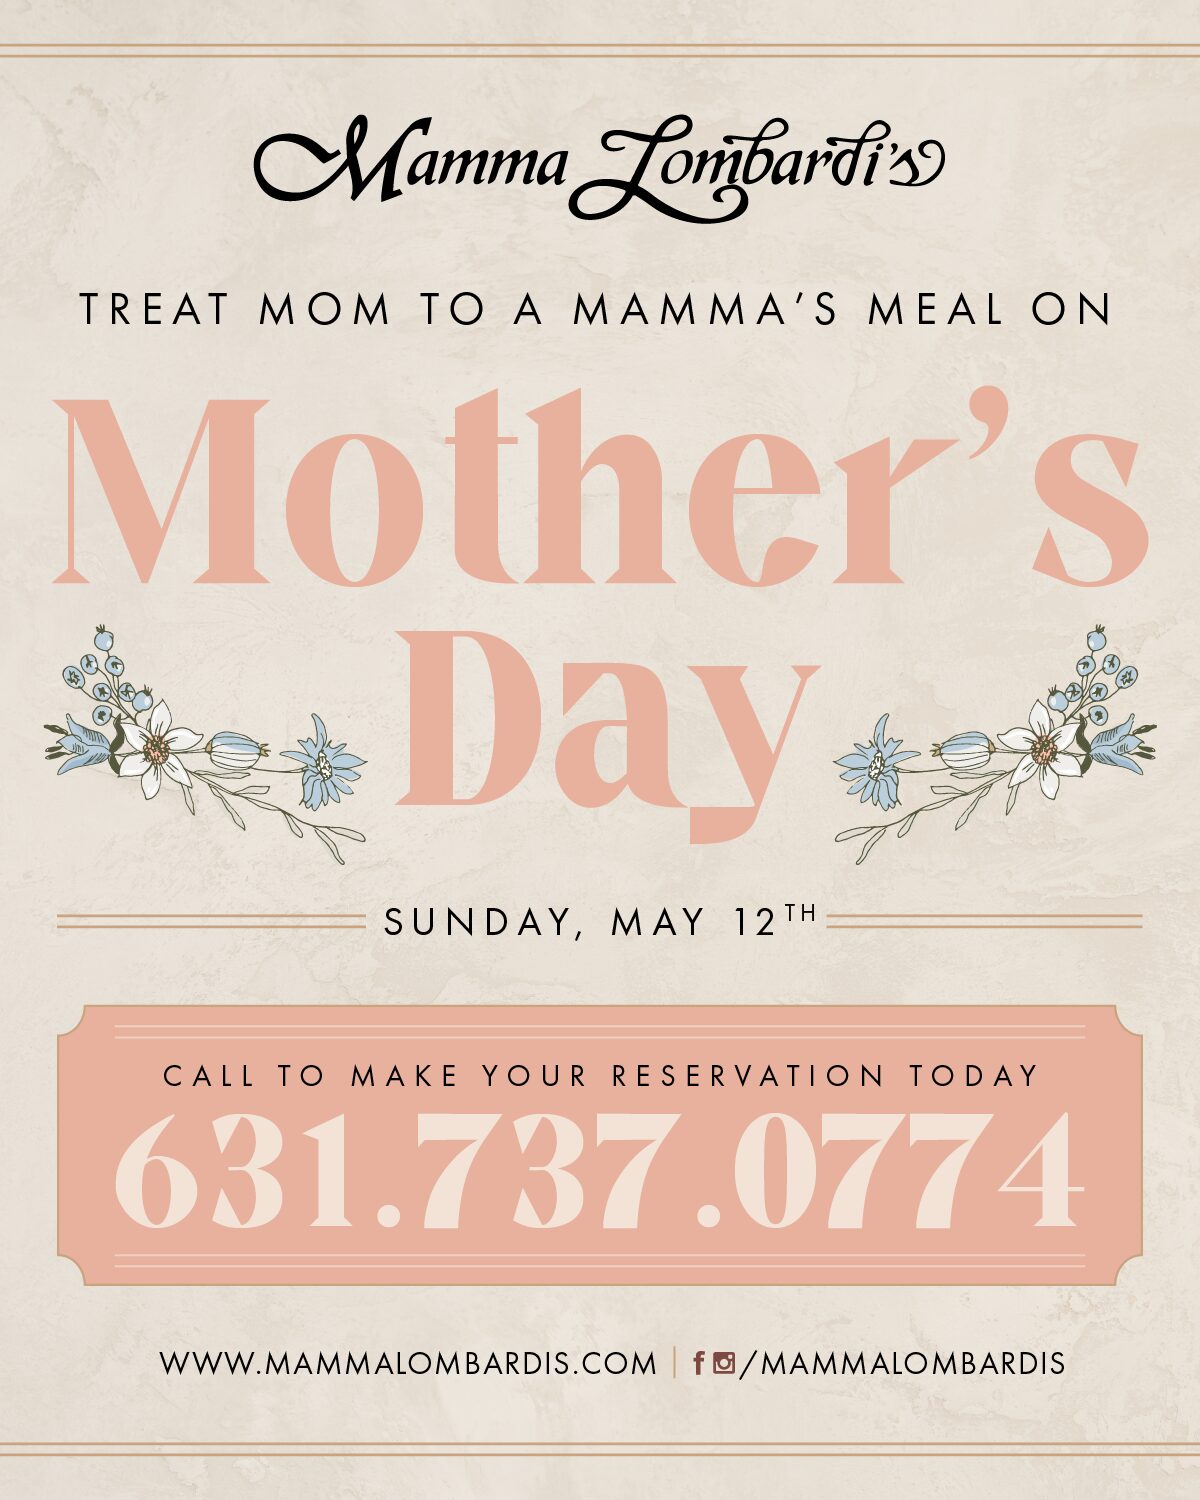 TREAT MOM TO A MAMMA'S MEAL ON Mother's Day SUNDAY, MAY 12TH CALL TO MAKE YOUR RESERVATION TODAY 631.737.0774 WWW.MAMMALOMBARDIS.COM fO/MAMMALOMBARDISTREAT MOM TO A MAMMA'S MEAL ON Mother's Day SUNDAY, MAY 12TH CALL TO MAKE YOUR RESERVATION TODAY 631.737.0774 WWW.MAMMALOMBARDIS.COM fO/MAMMALOMBARDIS